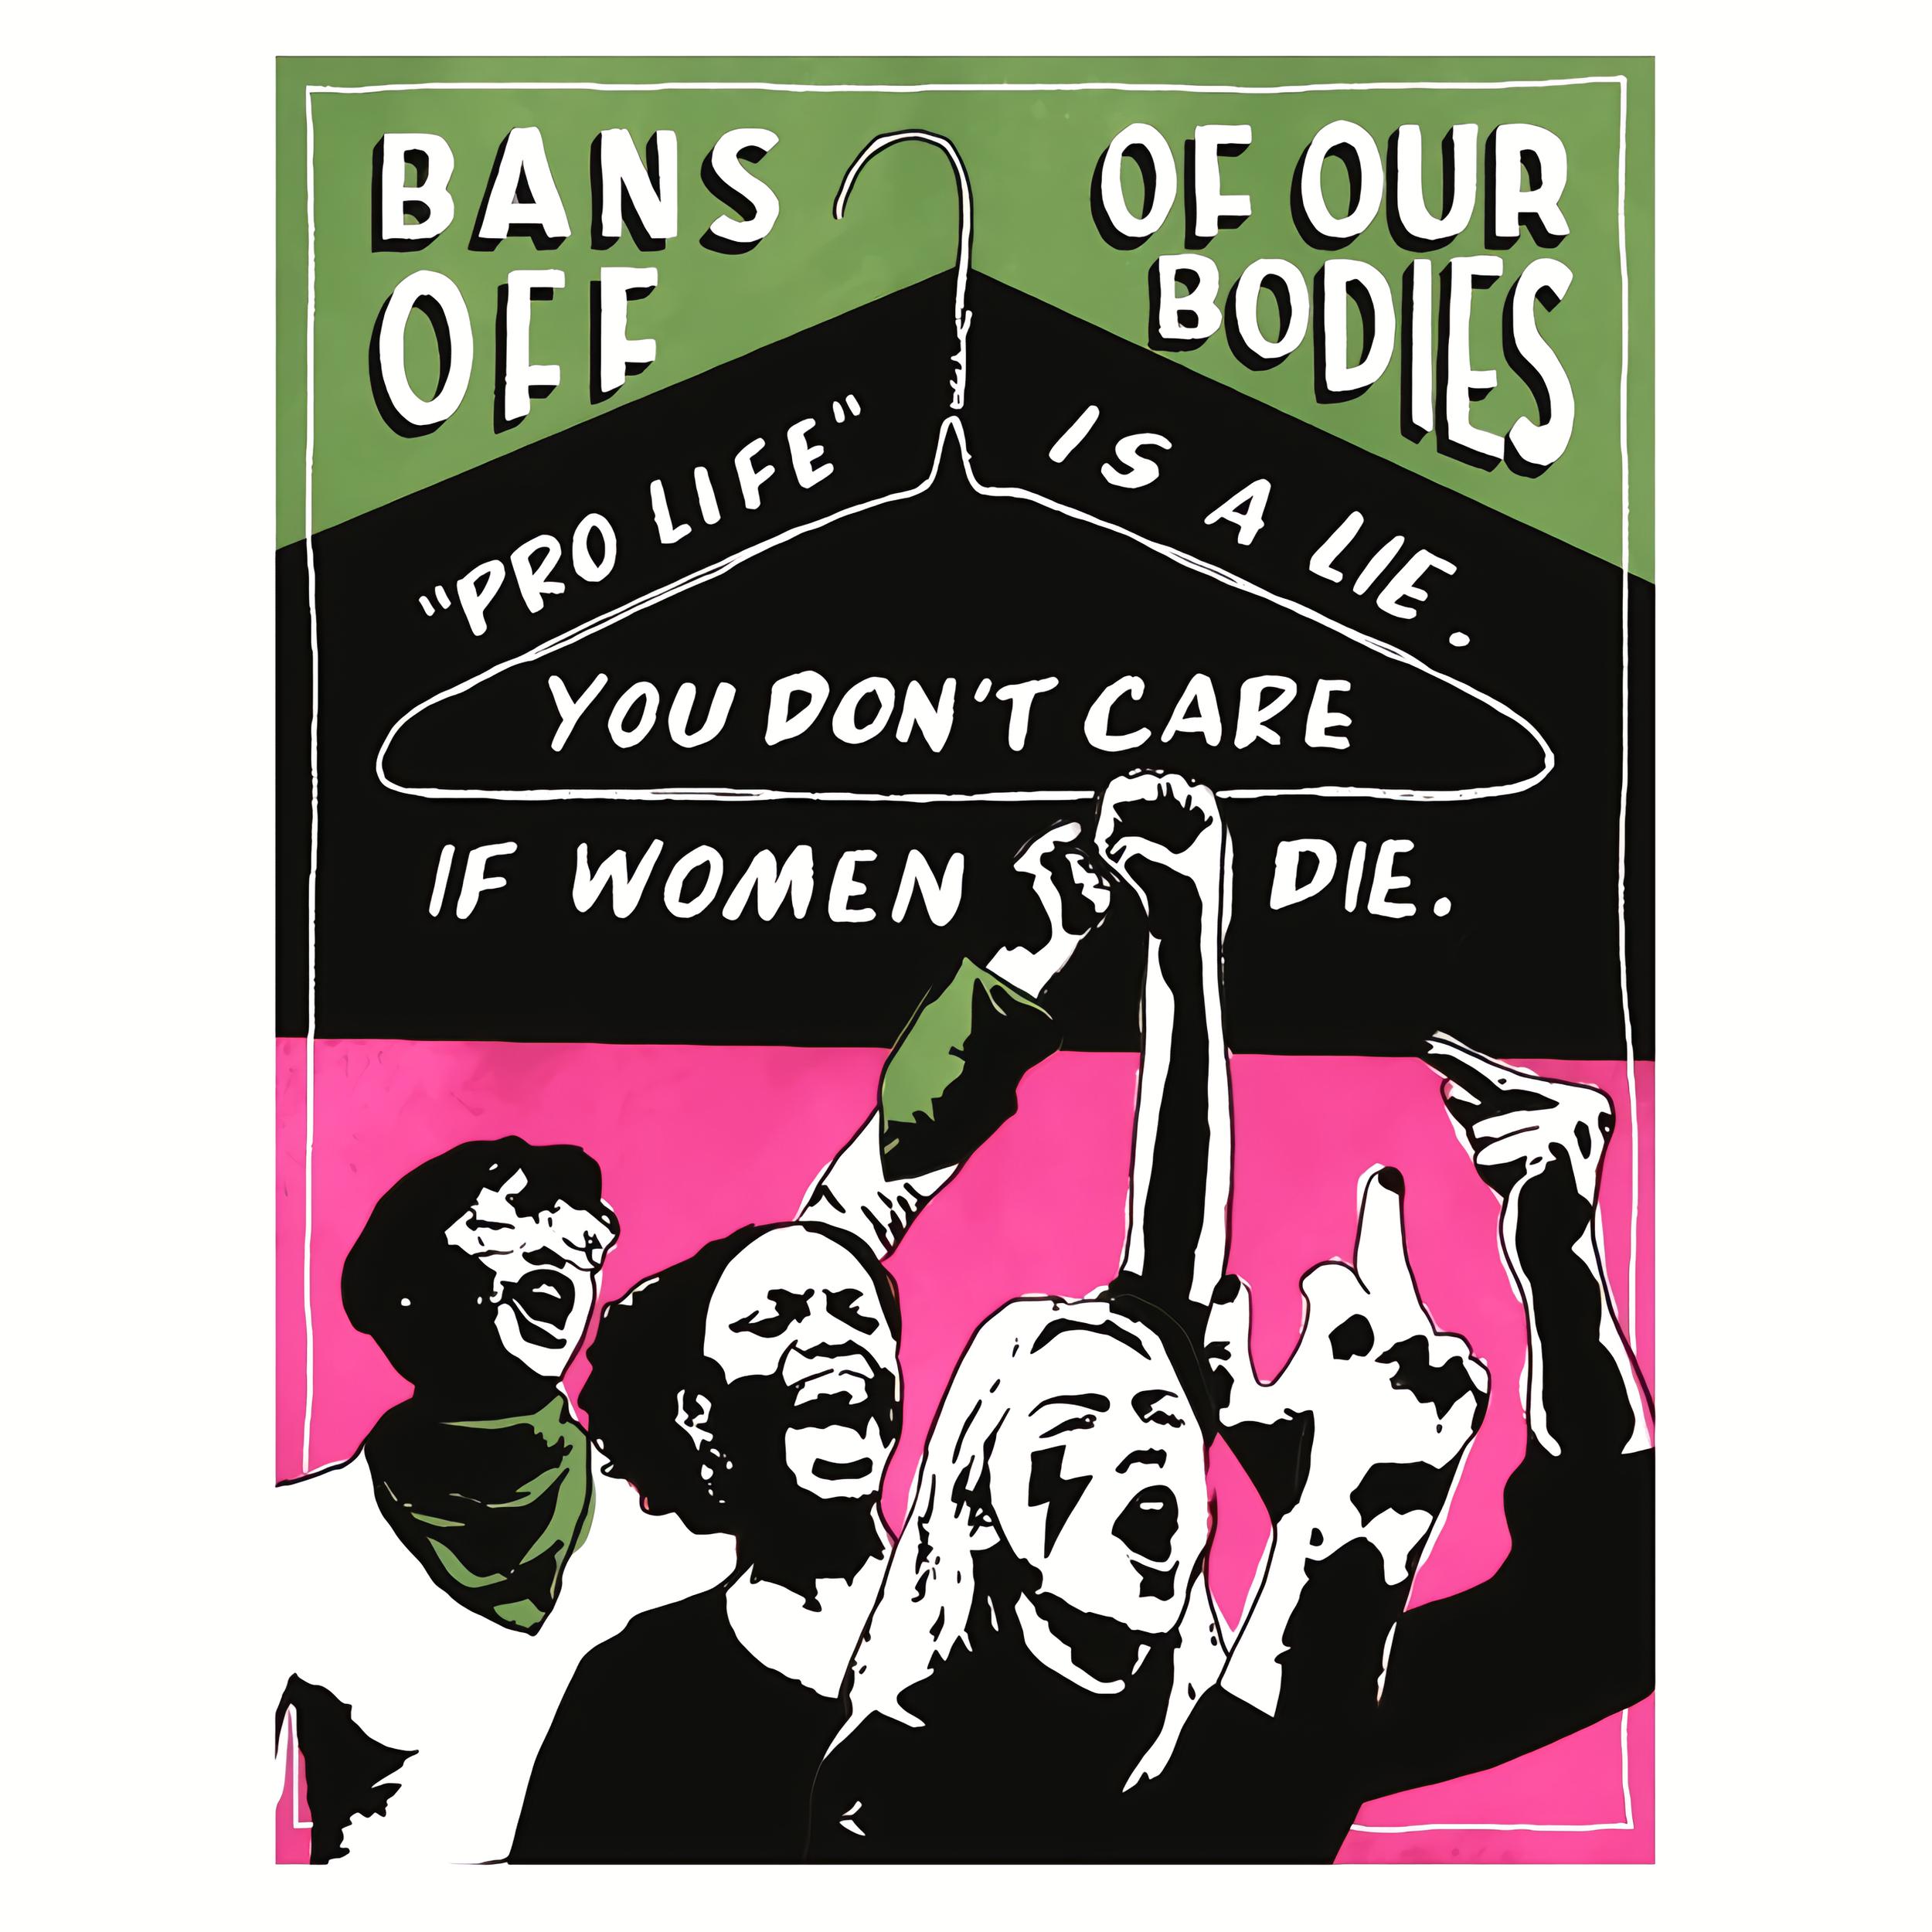 Bans off of our bodies